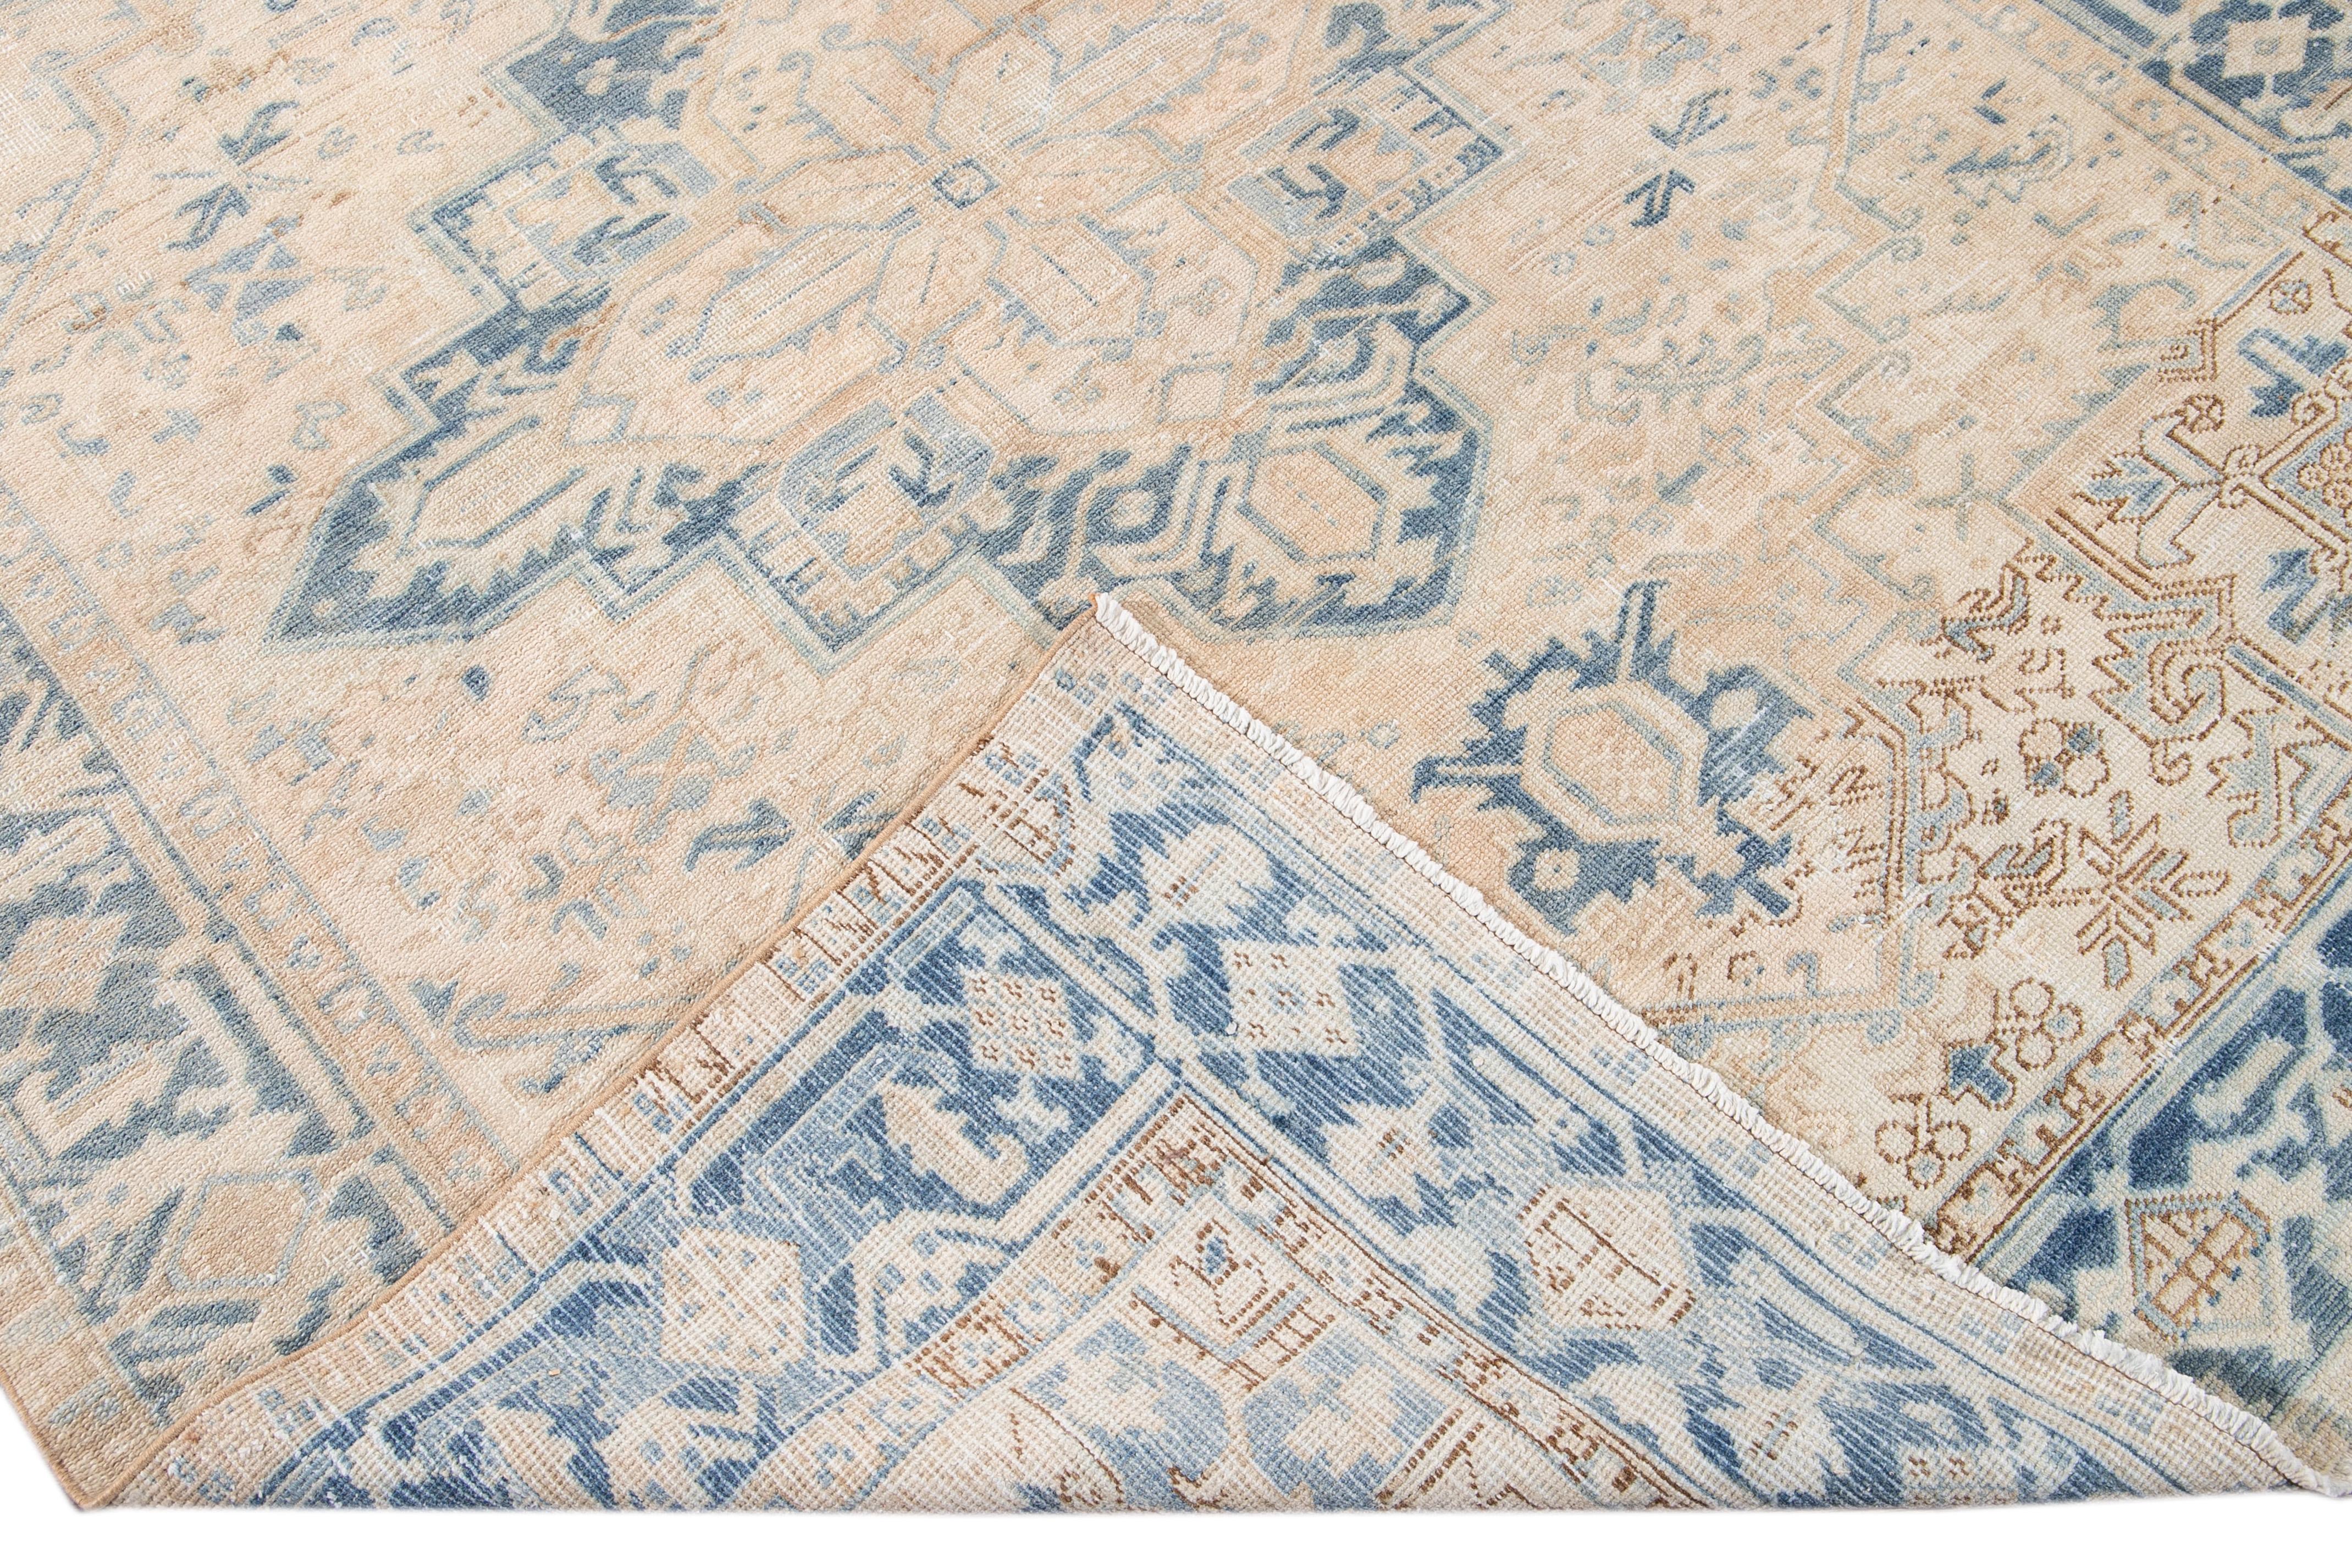 Beautiful antique Persian Heriz hand-knotted wool rug with a beige field. This Heriz rug has a blue frame and accents in an all-over gorgeous geometric medallion floral design.

This rug measures: 7'2 x 9'1